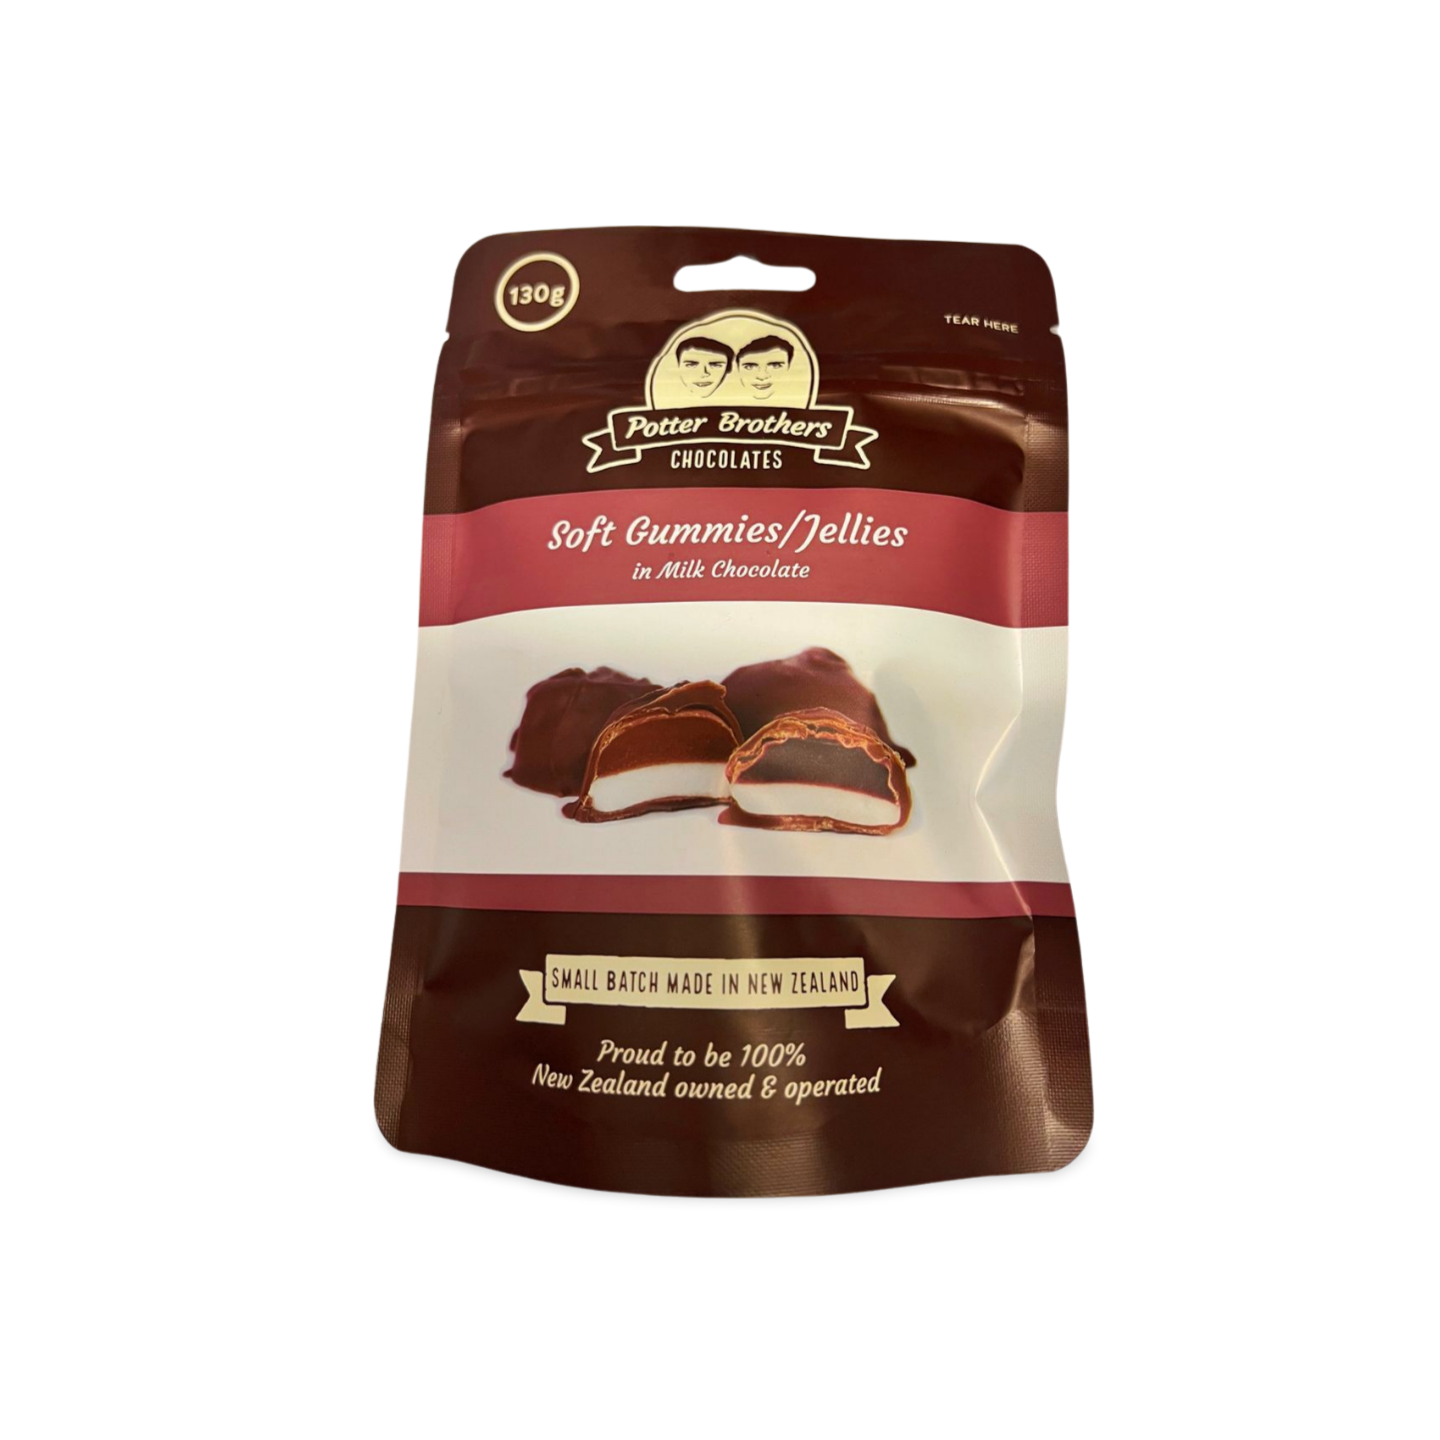 Potter Brothers Chocolates 130g